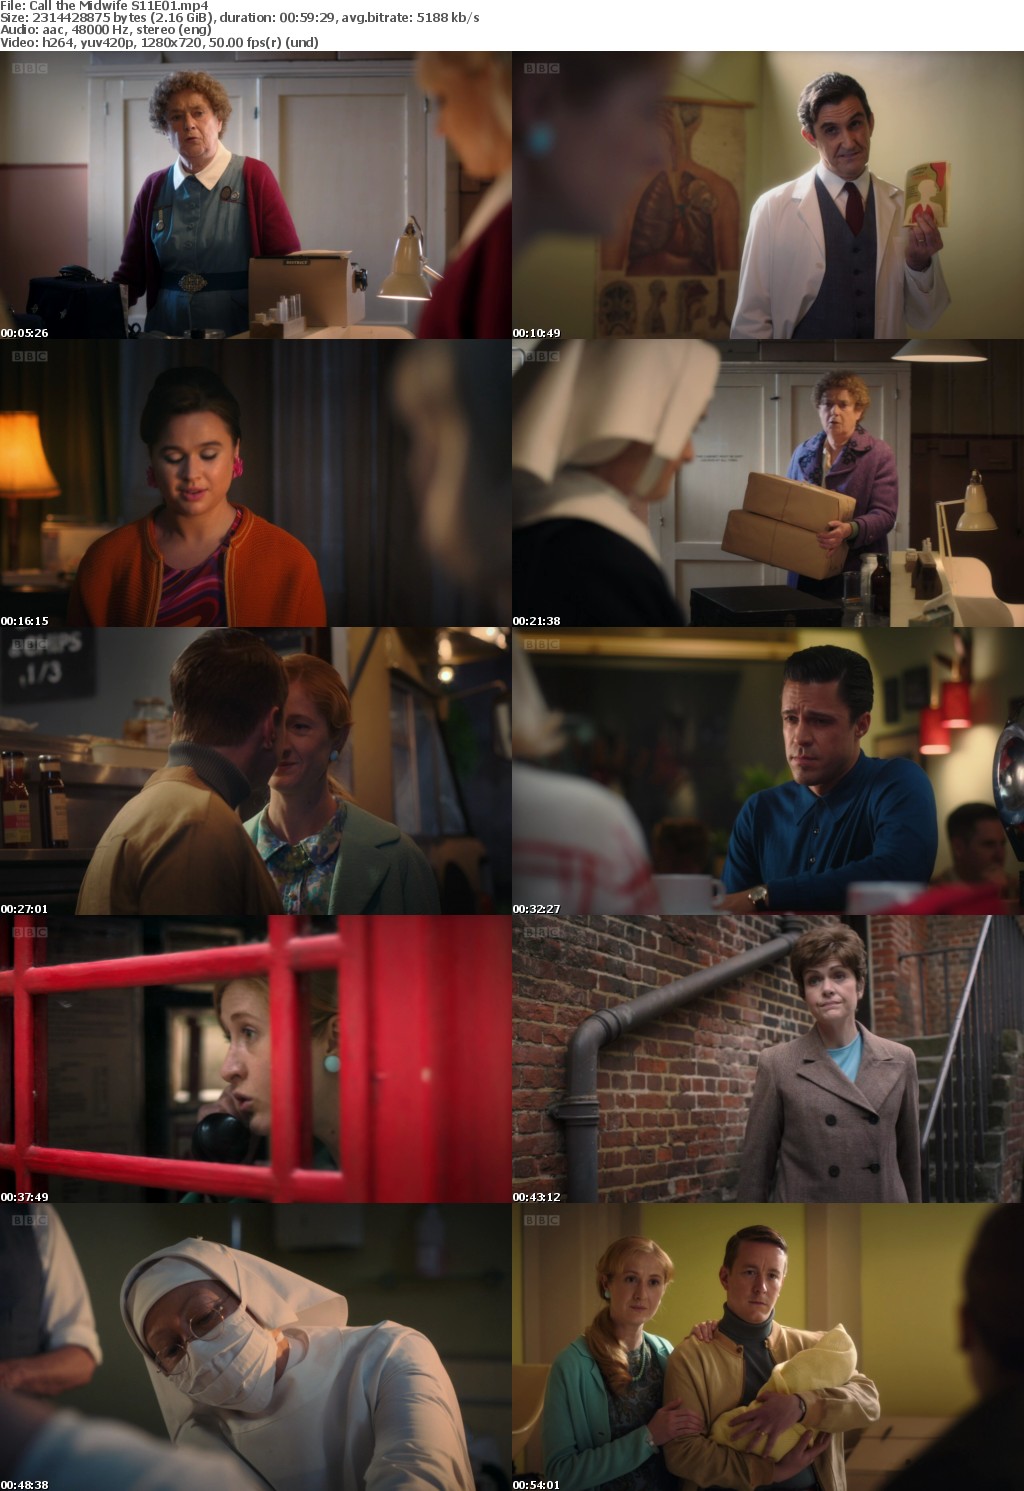 Call the Midwife S11E01 (1280x720p HD, 50fps, soft Eng subs)